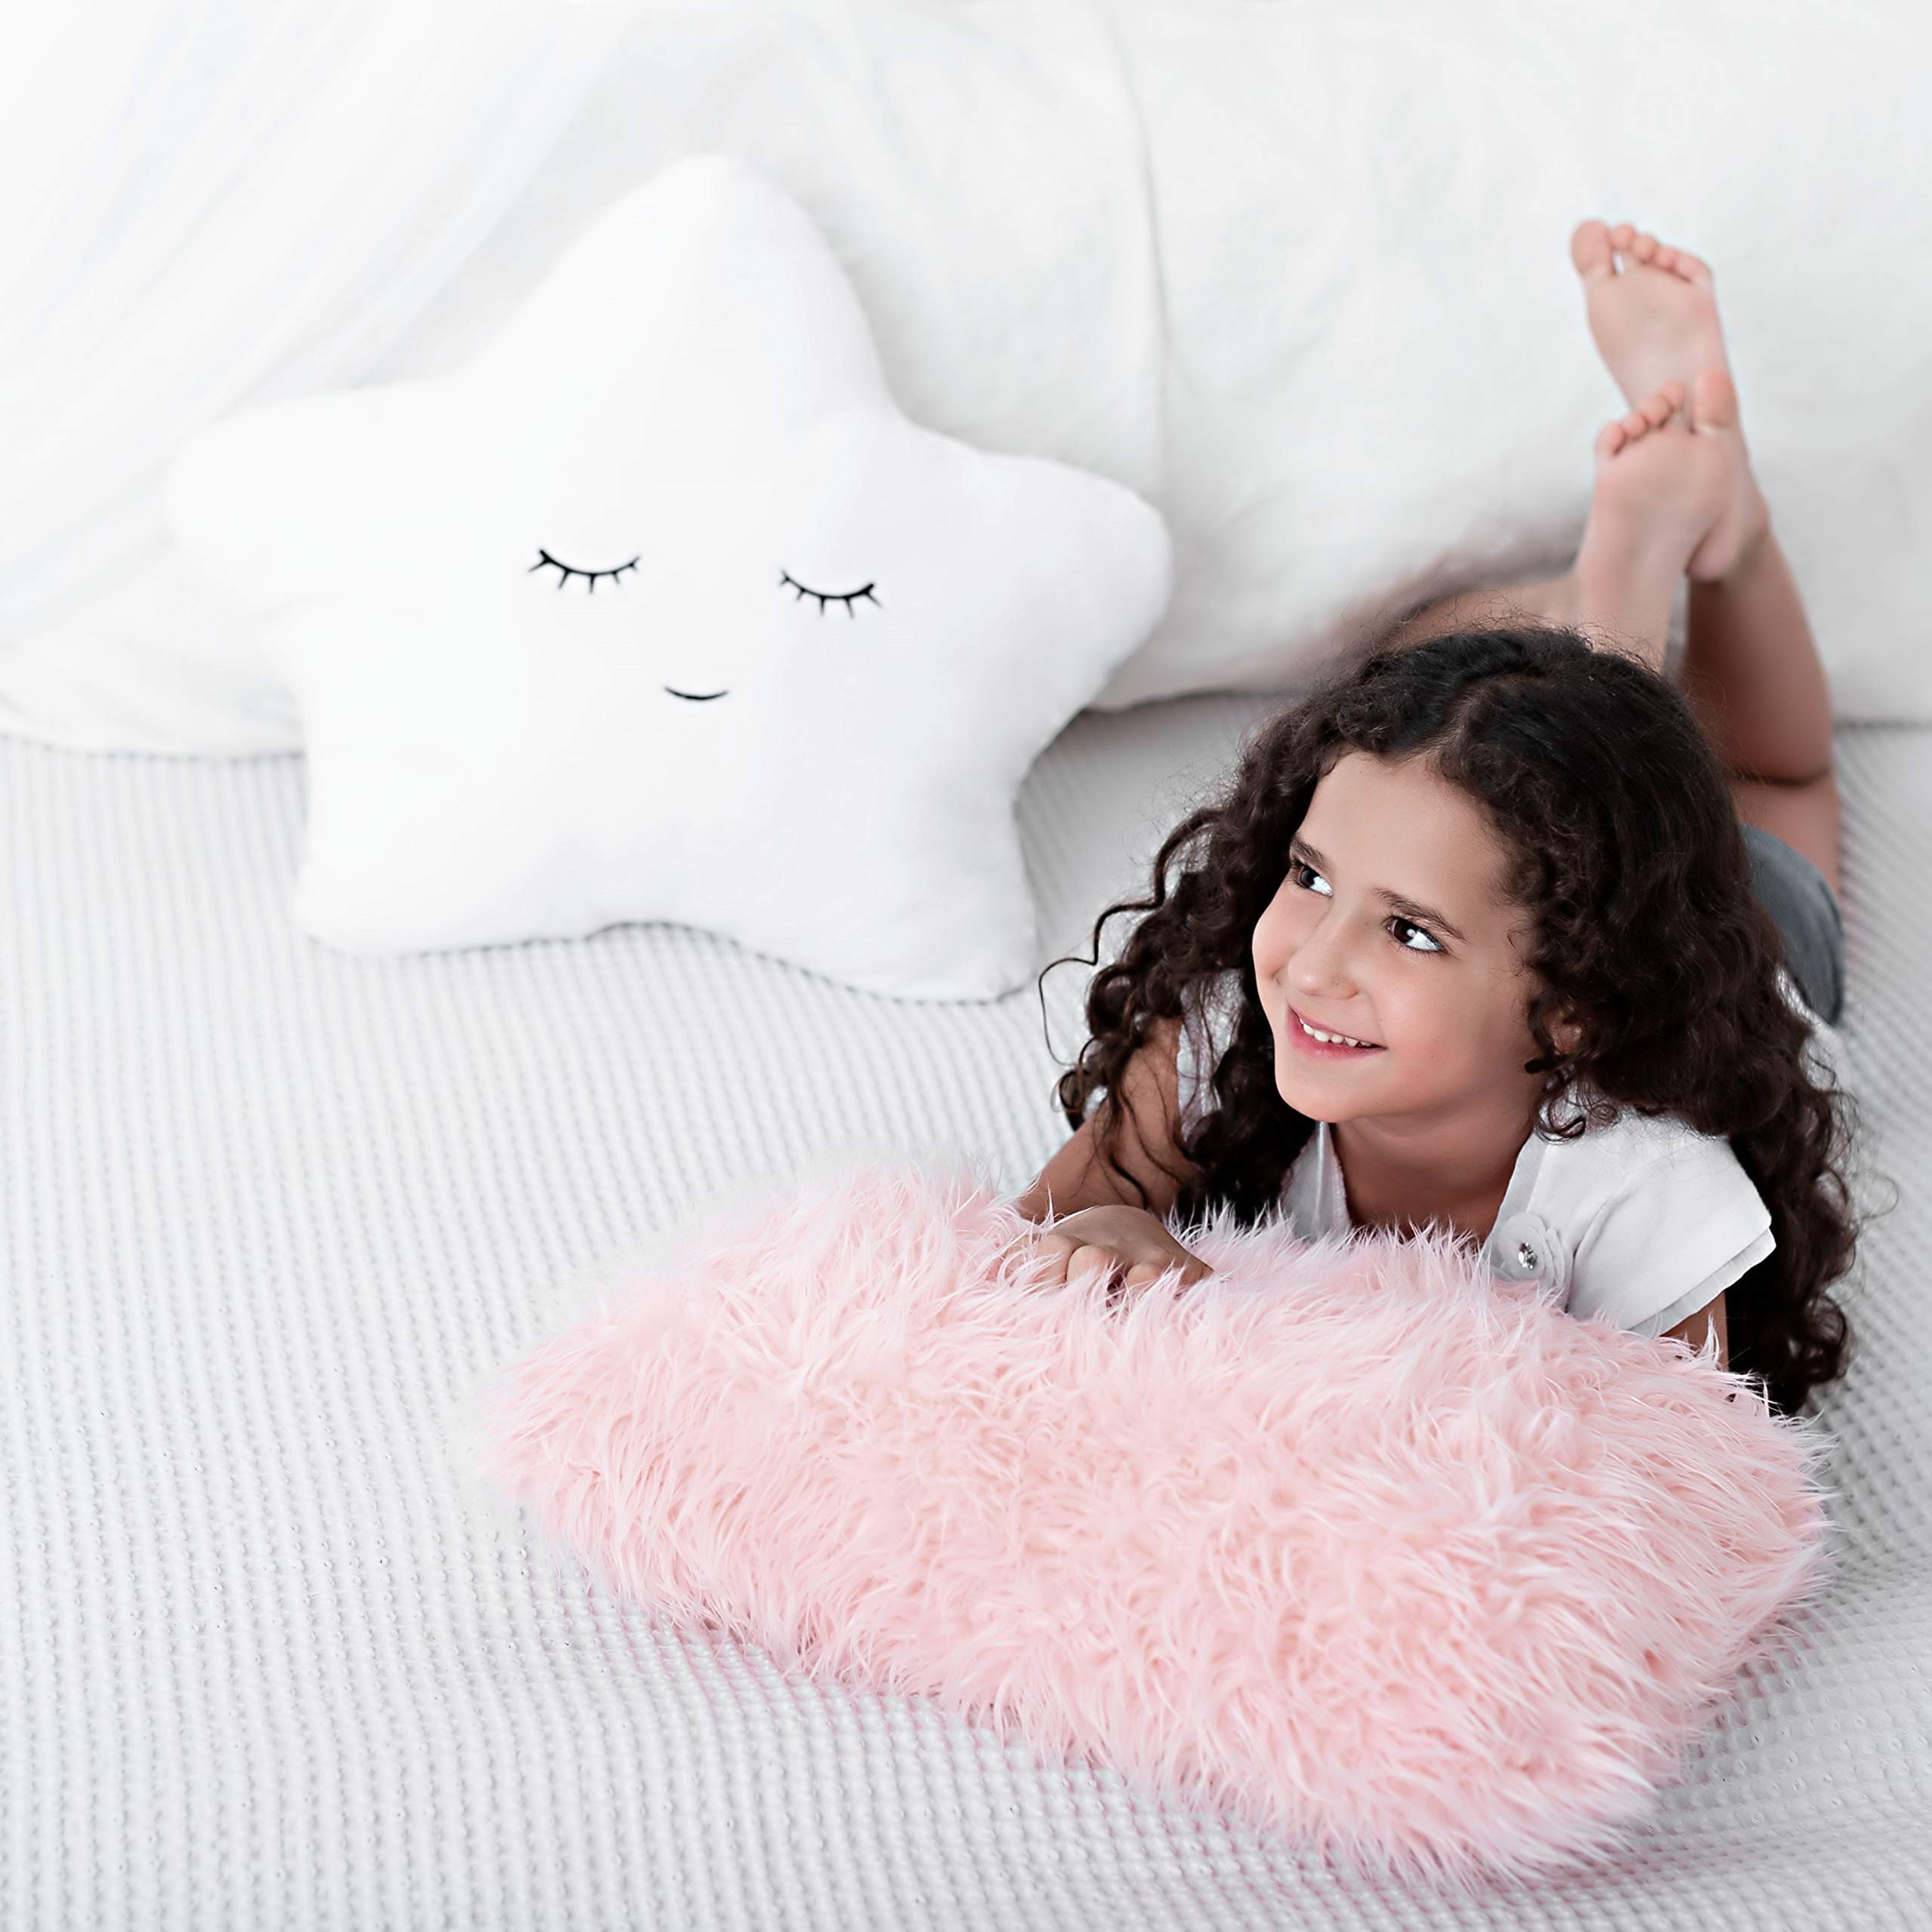 Set of 2 Decorative Pillows for Girls, Toddler Kids Room. Star Pillow Fluffy White Embroidered and Furry Pink Faux Fur Pillow. Soft and Plush Girls Pillows – Throw Pillows for Kid’s Bedroom Décor